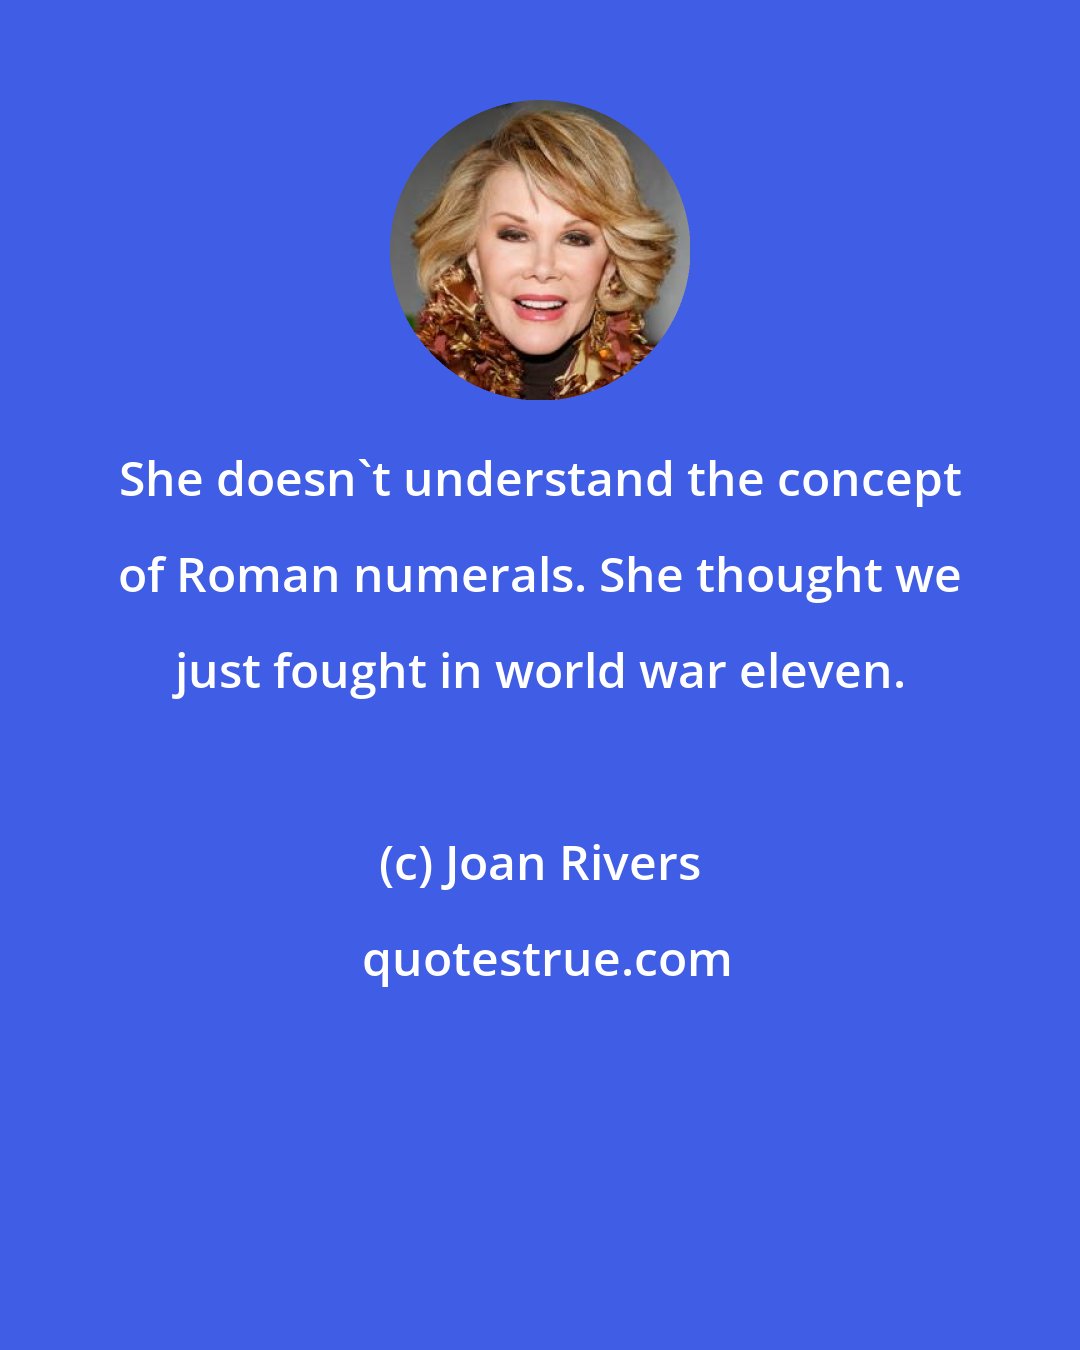 Joan Rivers: She doesn't understand the concept of Roman numerals. She thought we just fought in world war eleven.